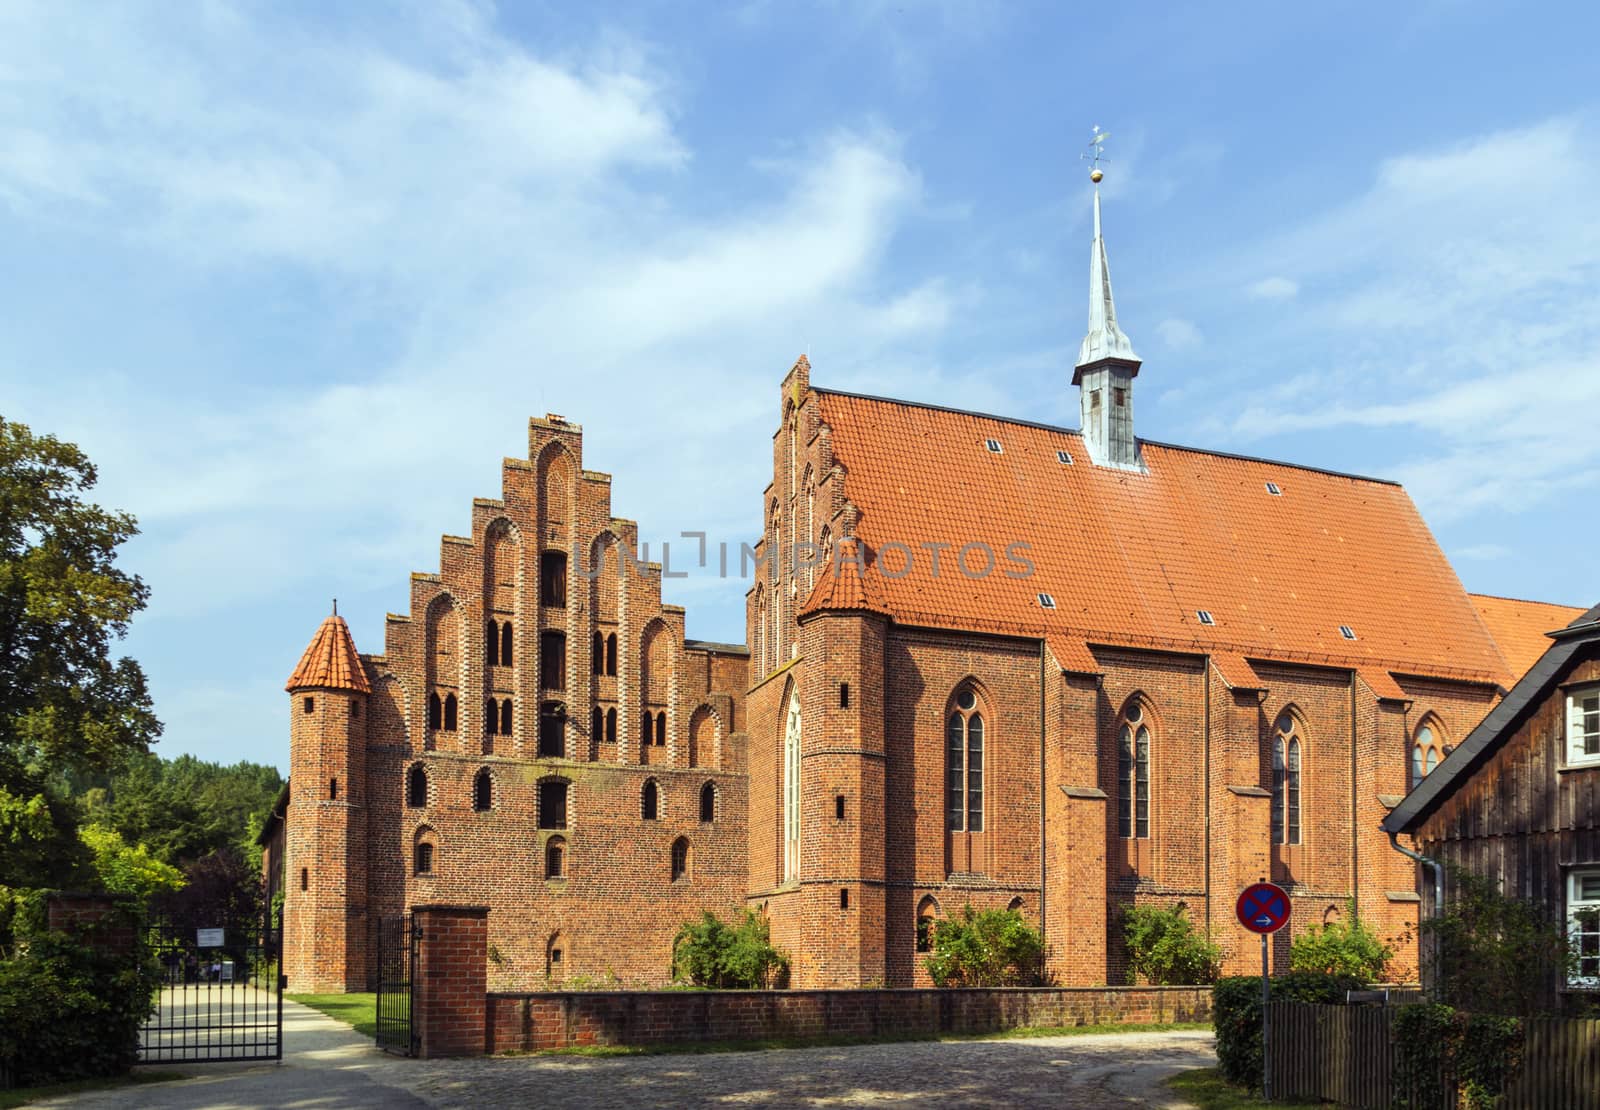 historic buildings in the style known as Brick Gothic in Wienhausen Abbey are well-preserved. Germany